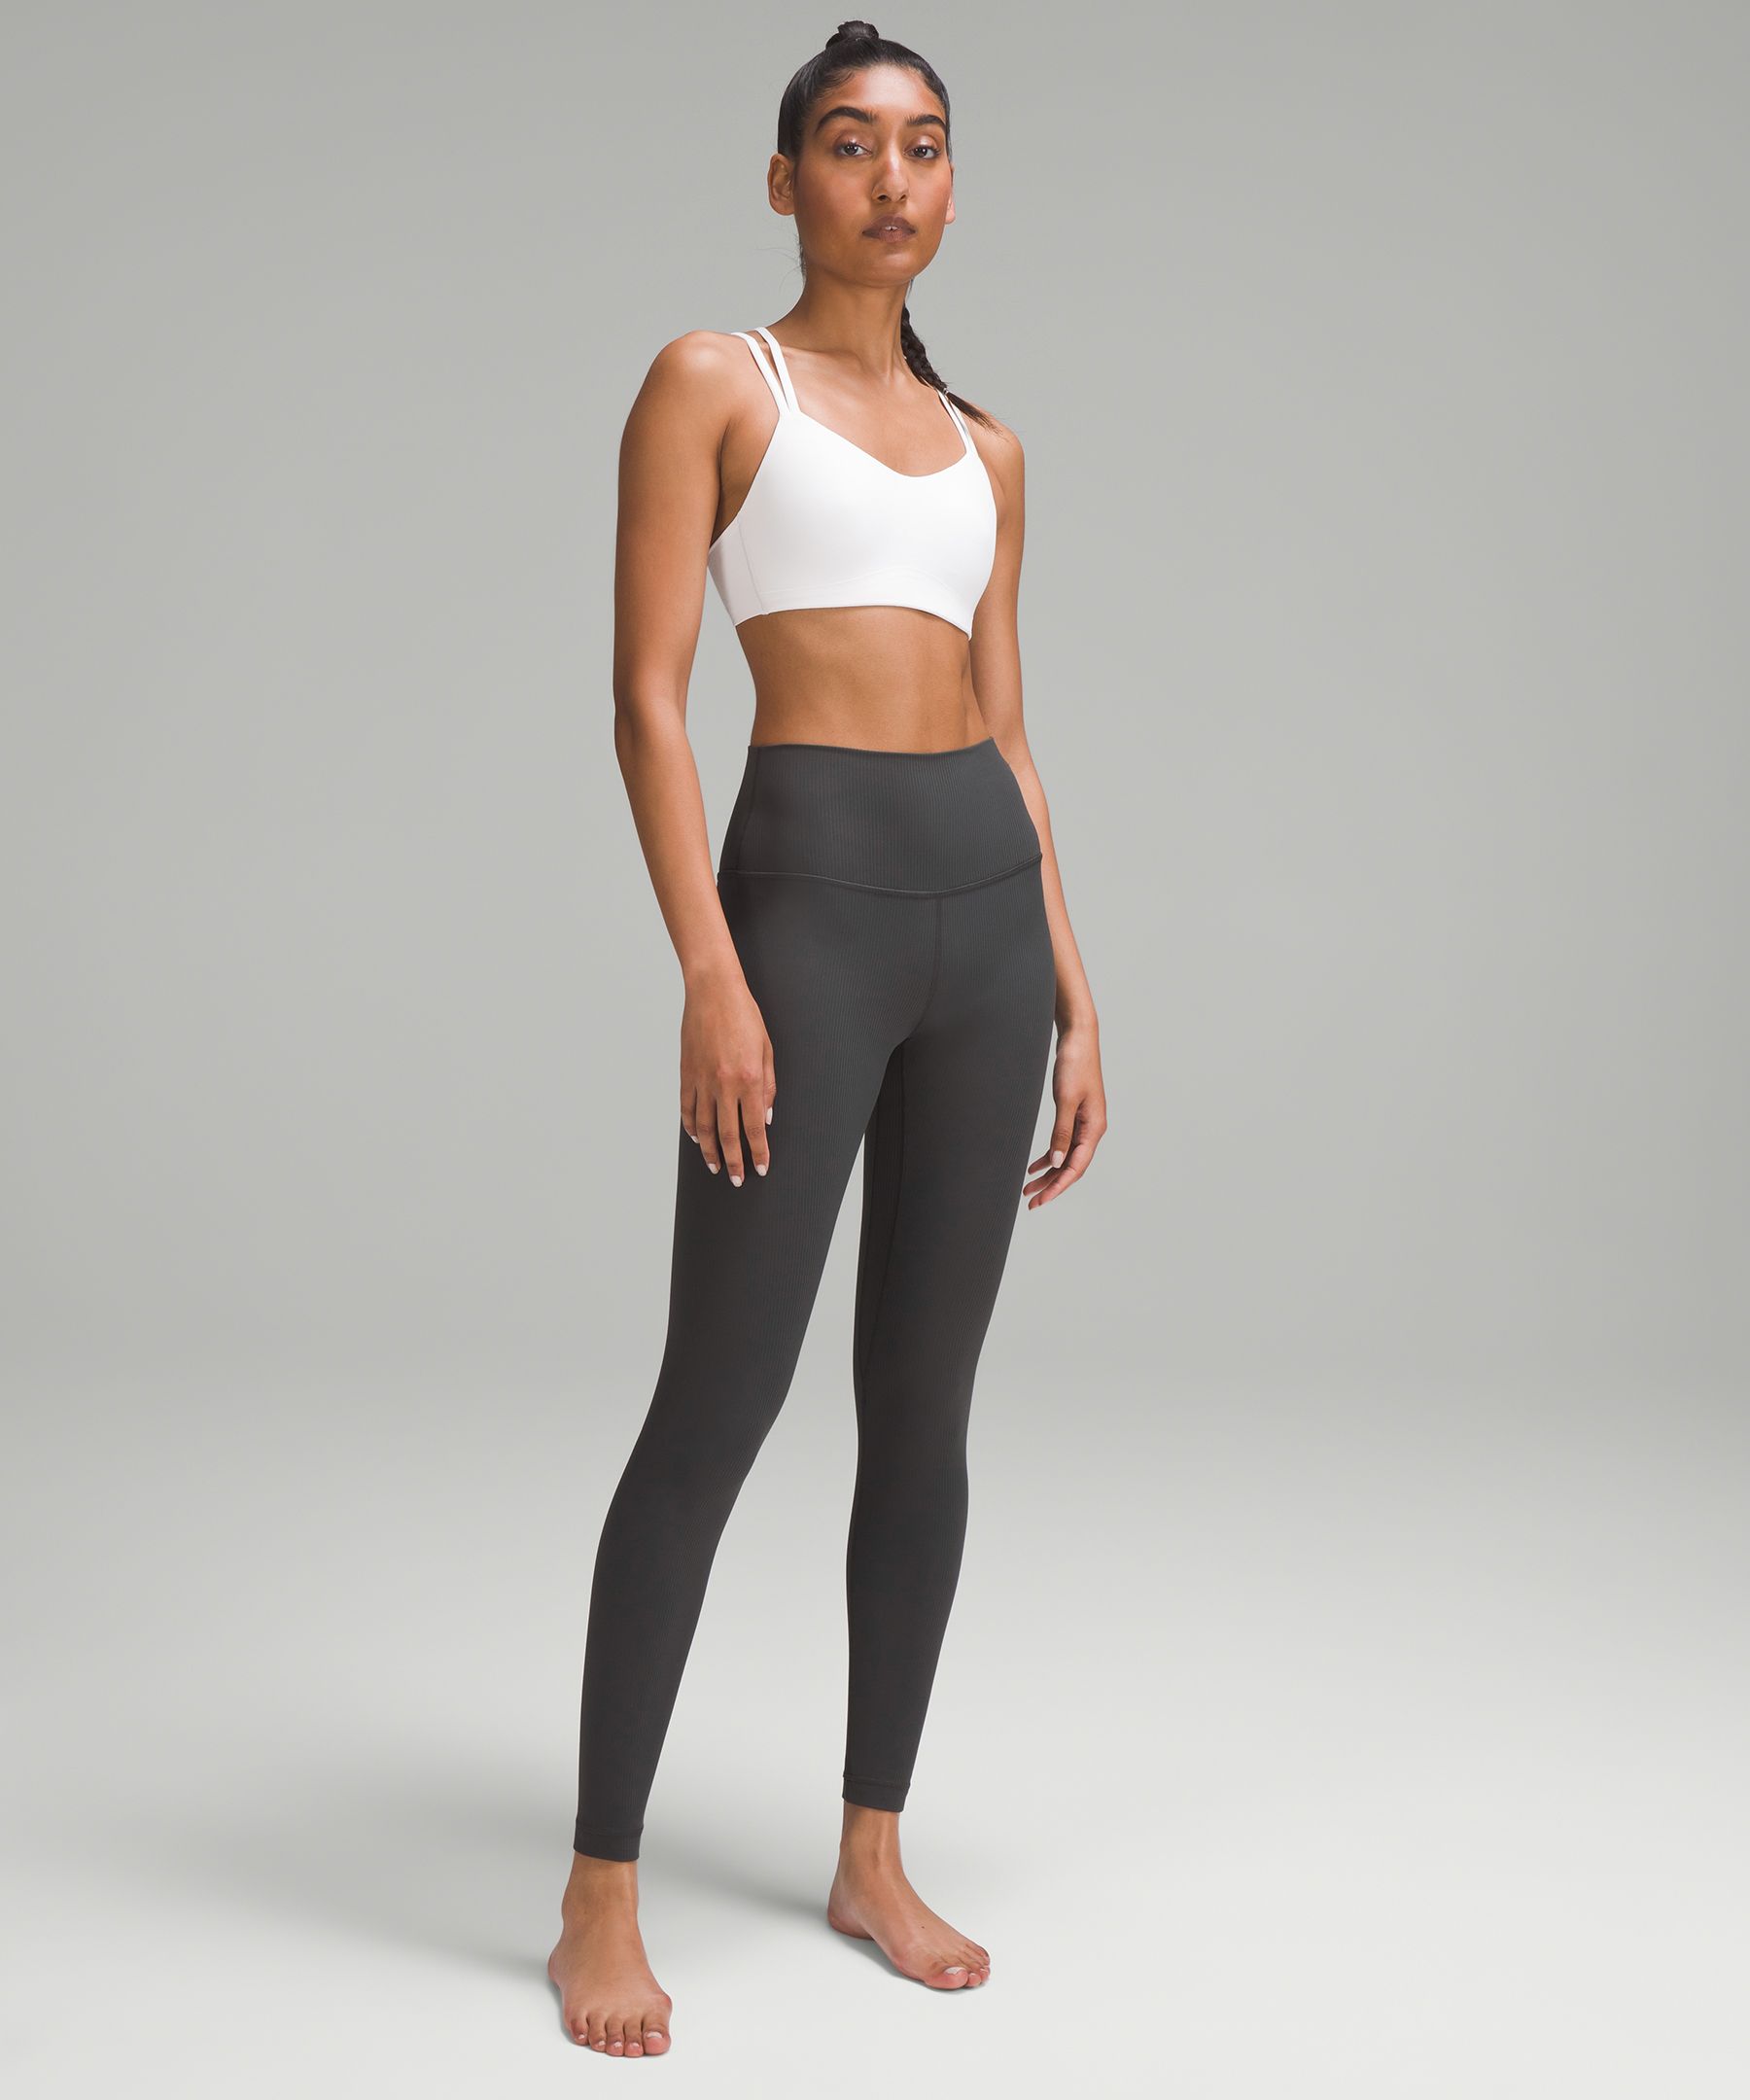 Lululemon Ribbed White Leggings Size 6 - $90 (34% Off Retail) - From Jessica